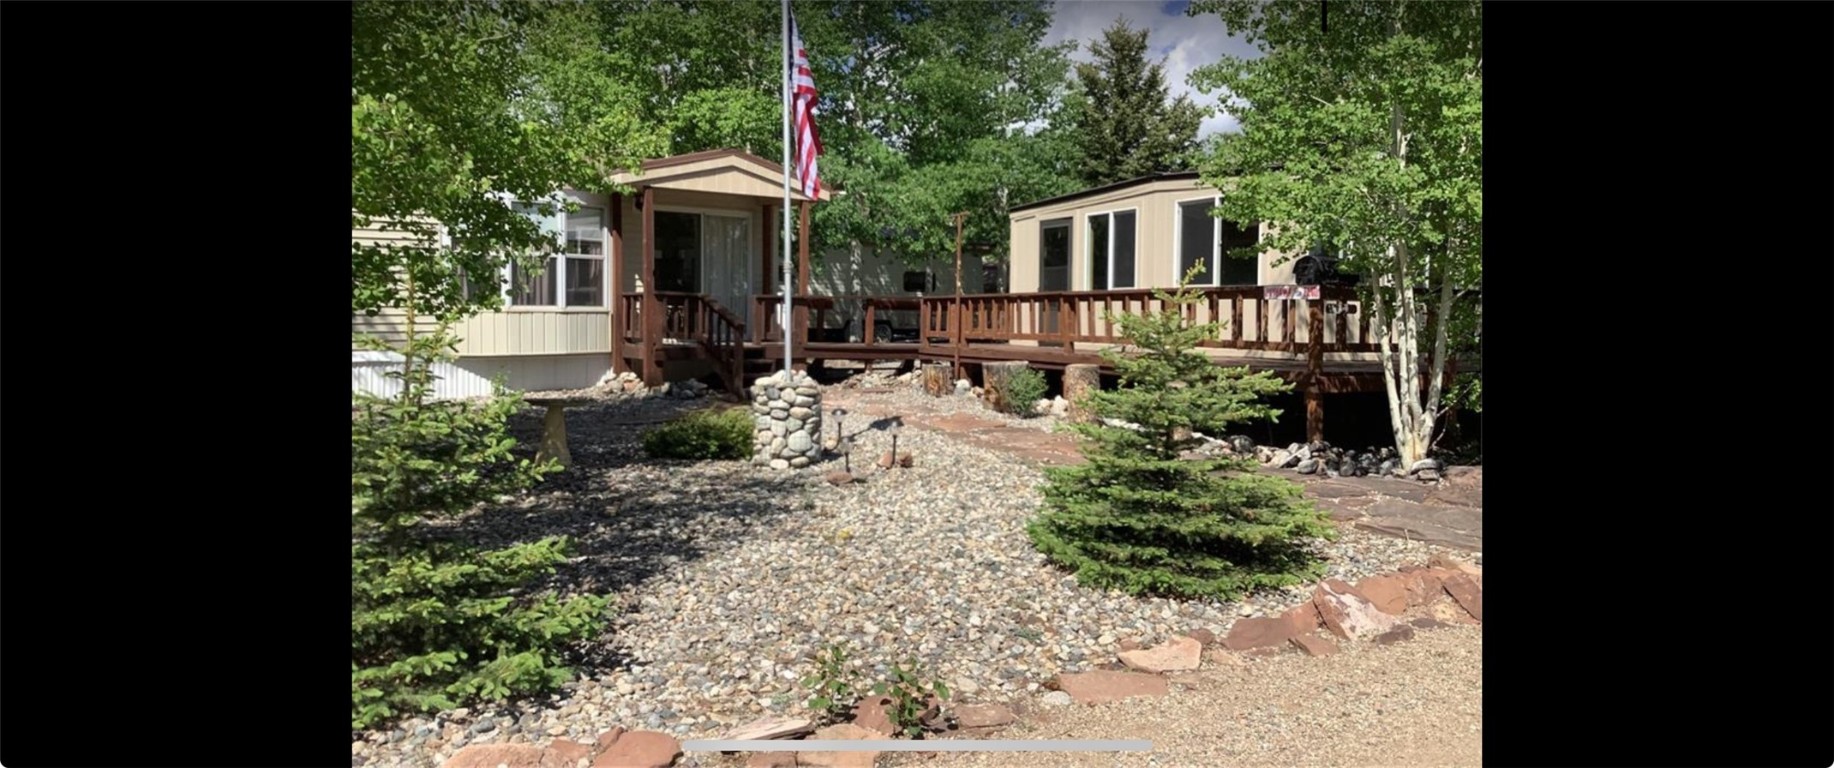 This is a one-of-a-kind property located in Camp Ground of the Rockies. Two corner lots that make it .23 acres with a 2002 Park Model and a deck connecting to a sun/family room. This unique lot also has tons of aspen trees on the lot for privacy and shade. A 43'1" 2017 Jayco Pinnacle Model 38REFS with 98 miles on the second lot that can be hooked up to sewer and water. The lot also has a pull-through driveway on the back and parking in the front and side. CORA has great amenities such as a Heated Pool, Horse Stables, Laundry, Clubhouse with full kitchen, Tennis Courts, Horse shoe pits, Sand Volleyball, and Desert Golf. This lot has 3 sheds and is close to the clubhouse facilities. Enjoy national forest trails out of your backyard. Experience the gated community, year-round access, with optional 6-month continuous living . WILL SELL LOTS SEPARATELY. ONE LOT HAS BUILDINGS ON IT AND ONE LOT HAS MOBILE HOME ON IT.